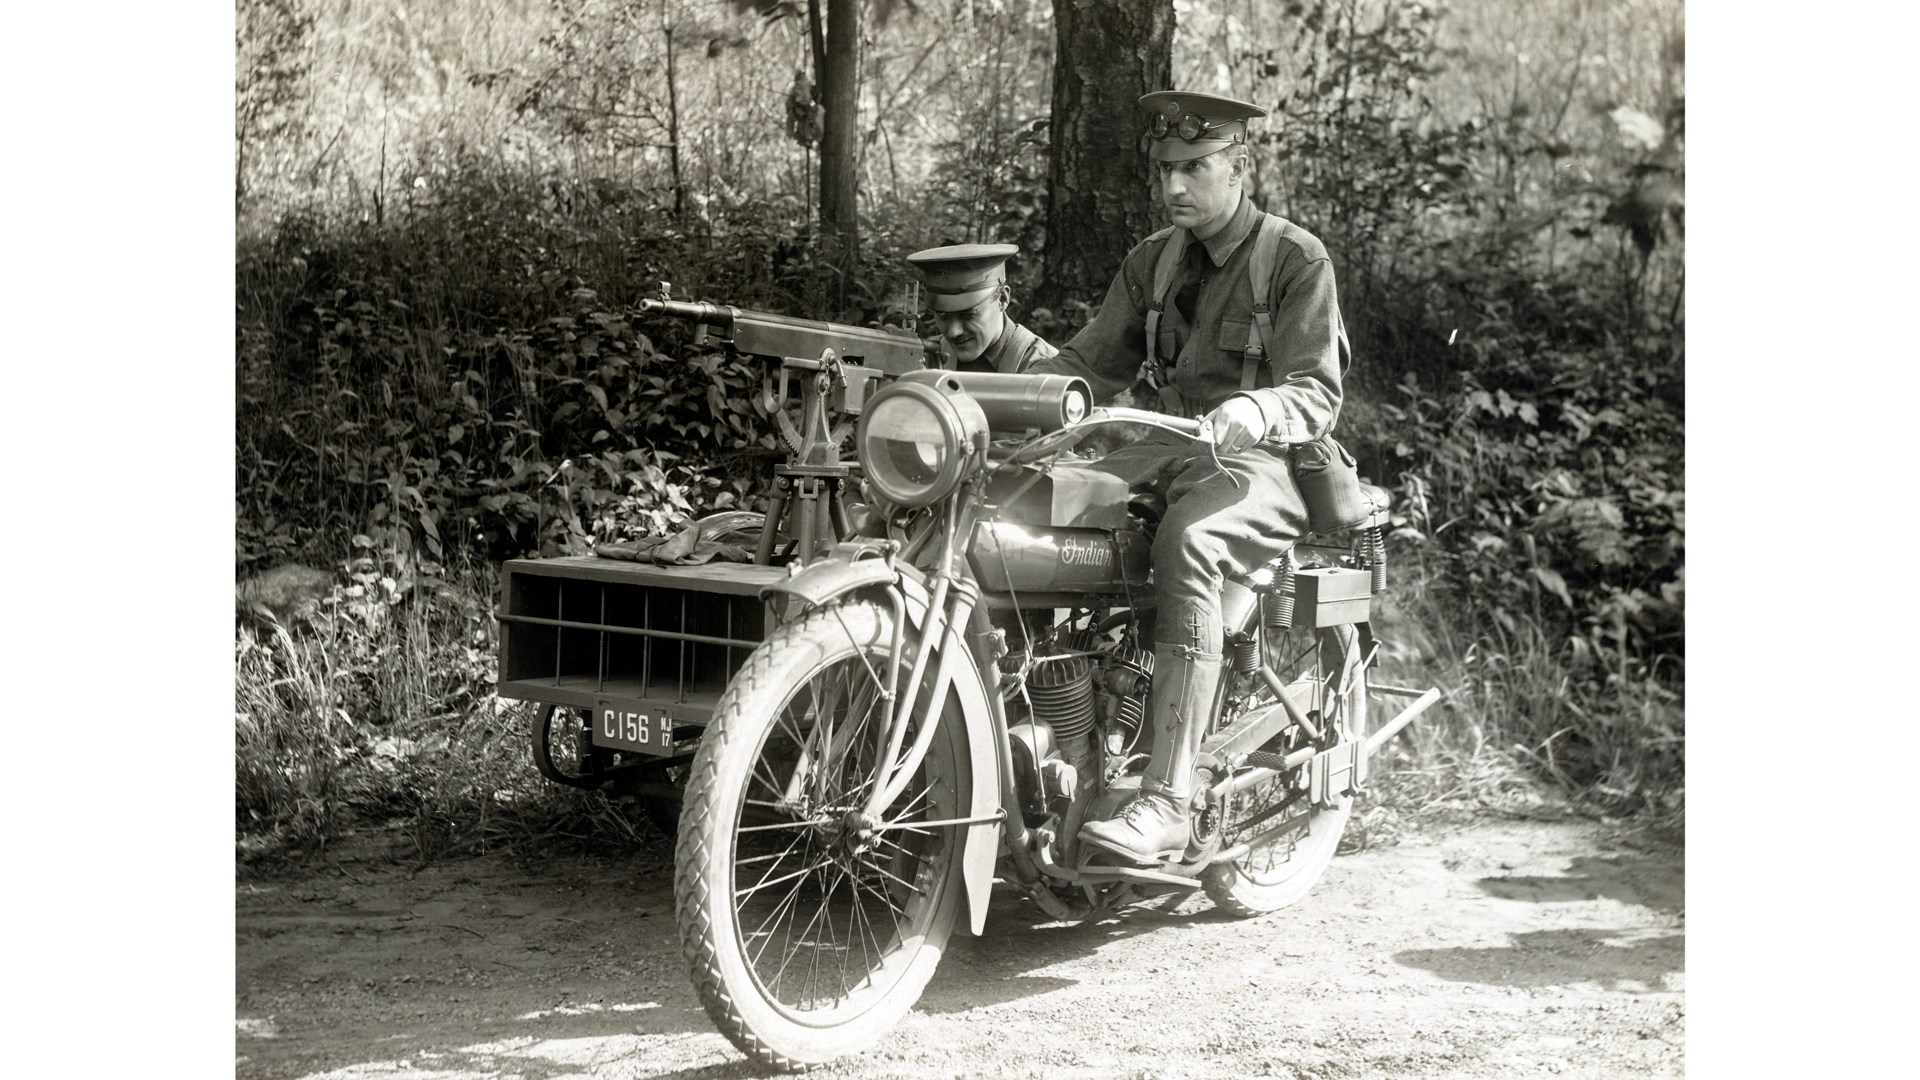 A firearm for a new century of mobile firepower: The M1895 machine gun was often mounted on early motorcycle/sidecar combinations. This is the New Jersey Mobile Battery during 1917. NARA